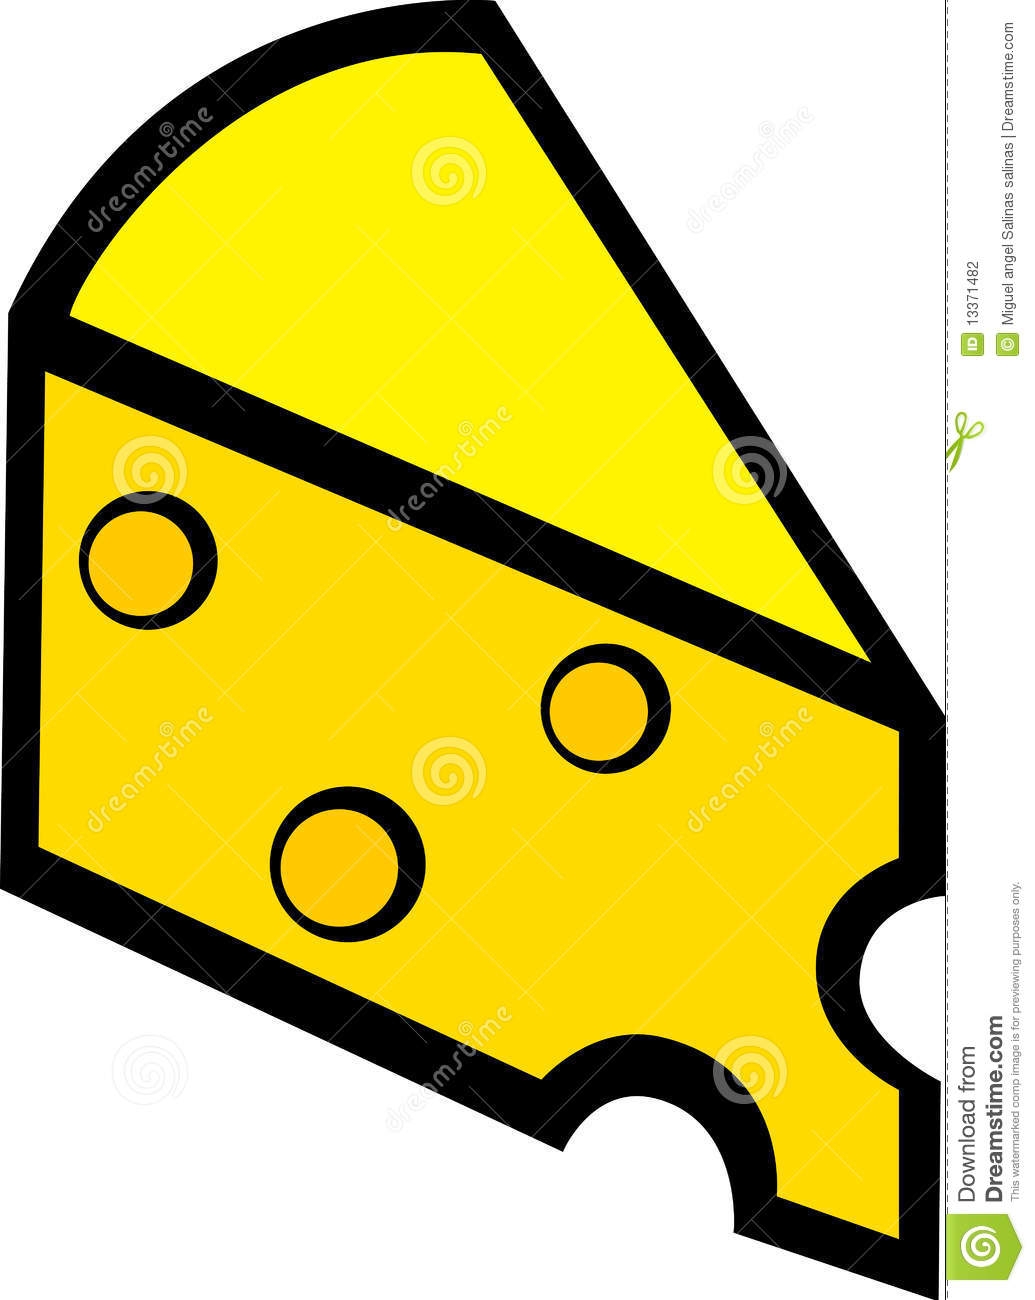 Cheese Clipart Clipart Best .